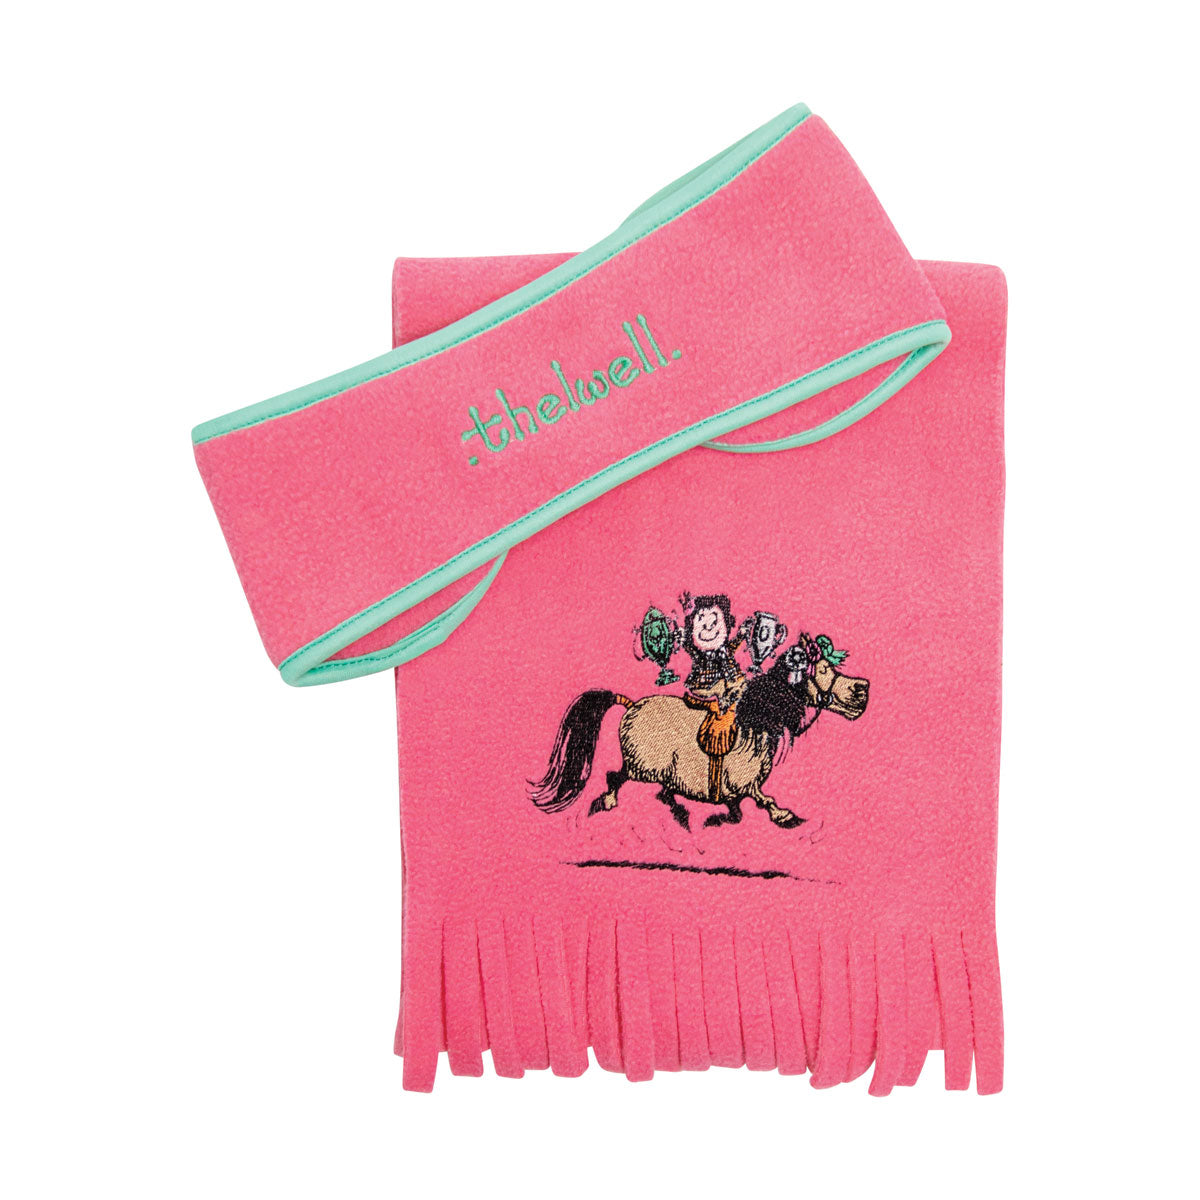 Hy Equestrian Thelwell Collection Trophy Headband and Scarf Set